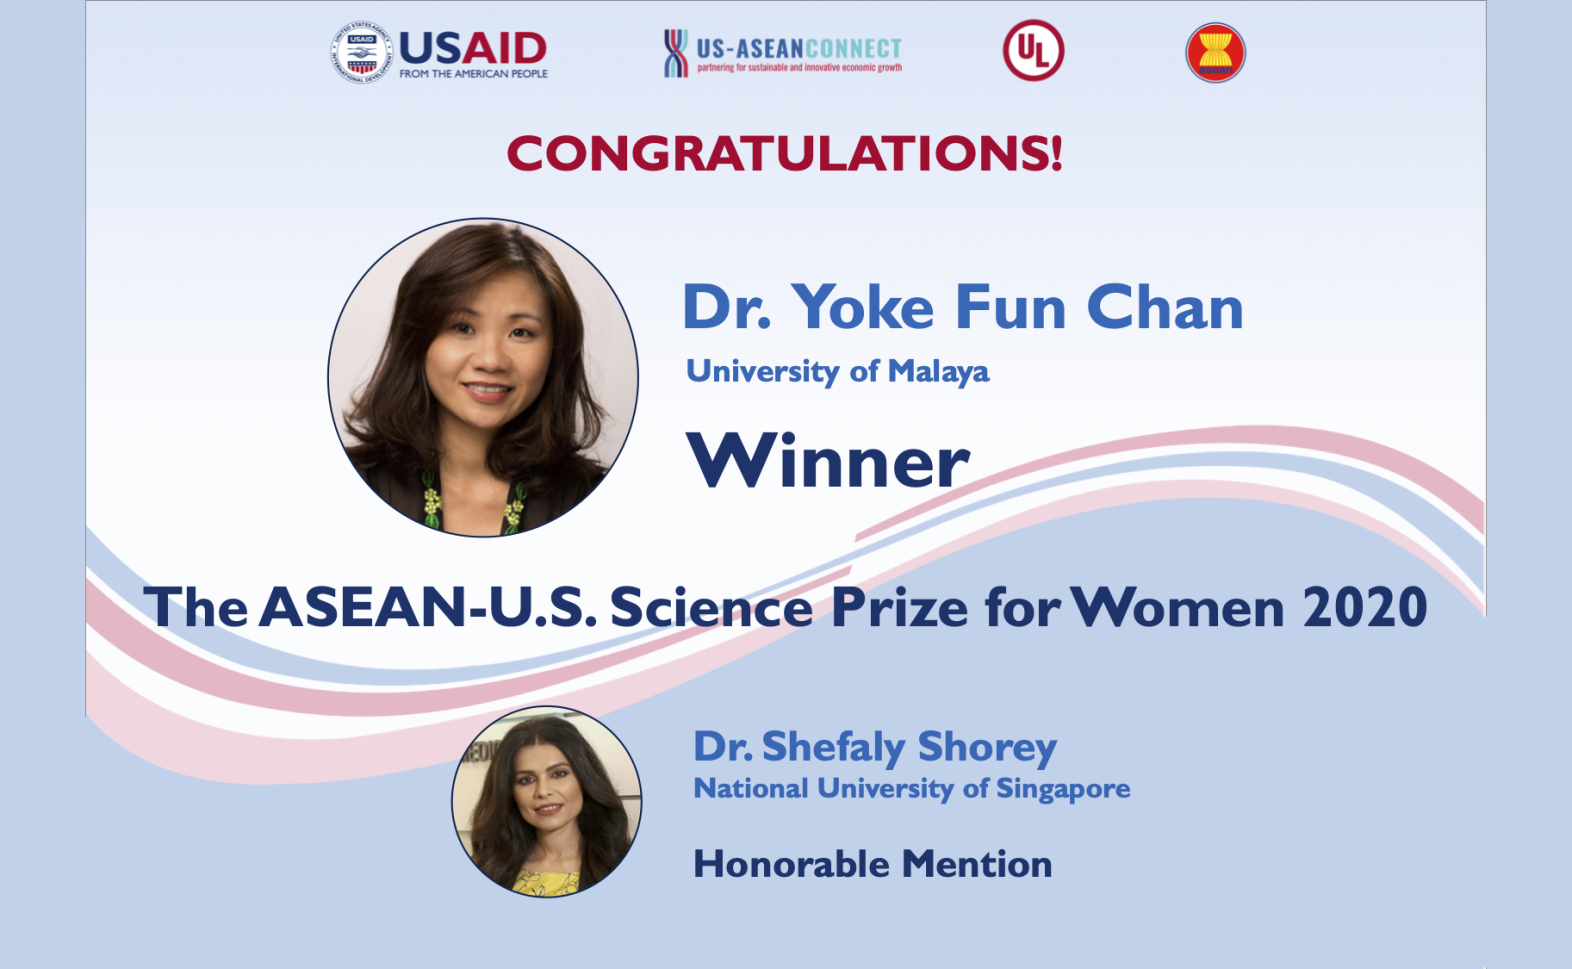 Association of Southeast Asian Nations (ASEAN)-U.S. Science Prize for Women